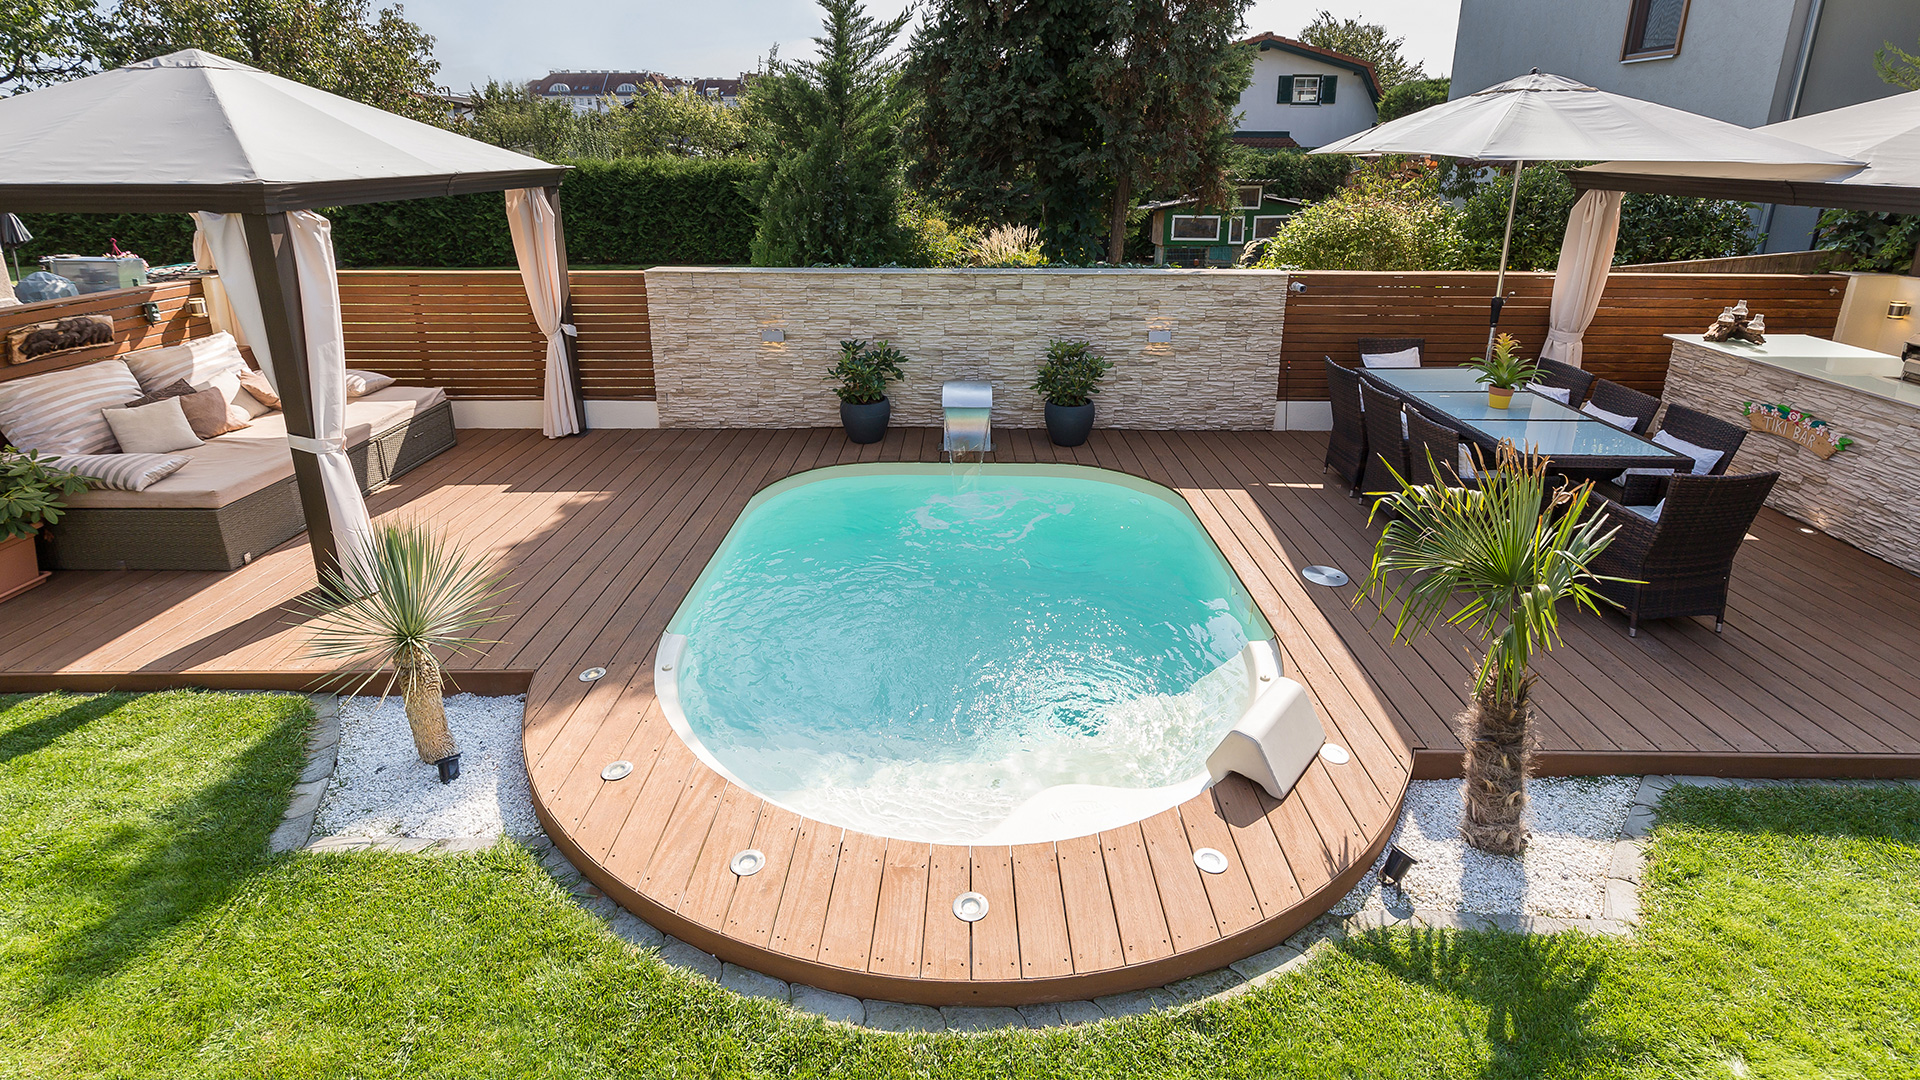 Pool Size How To Choose The Of, Pool And Landscaping